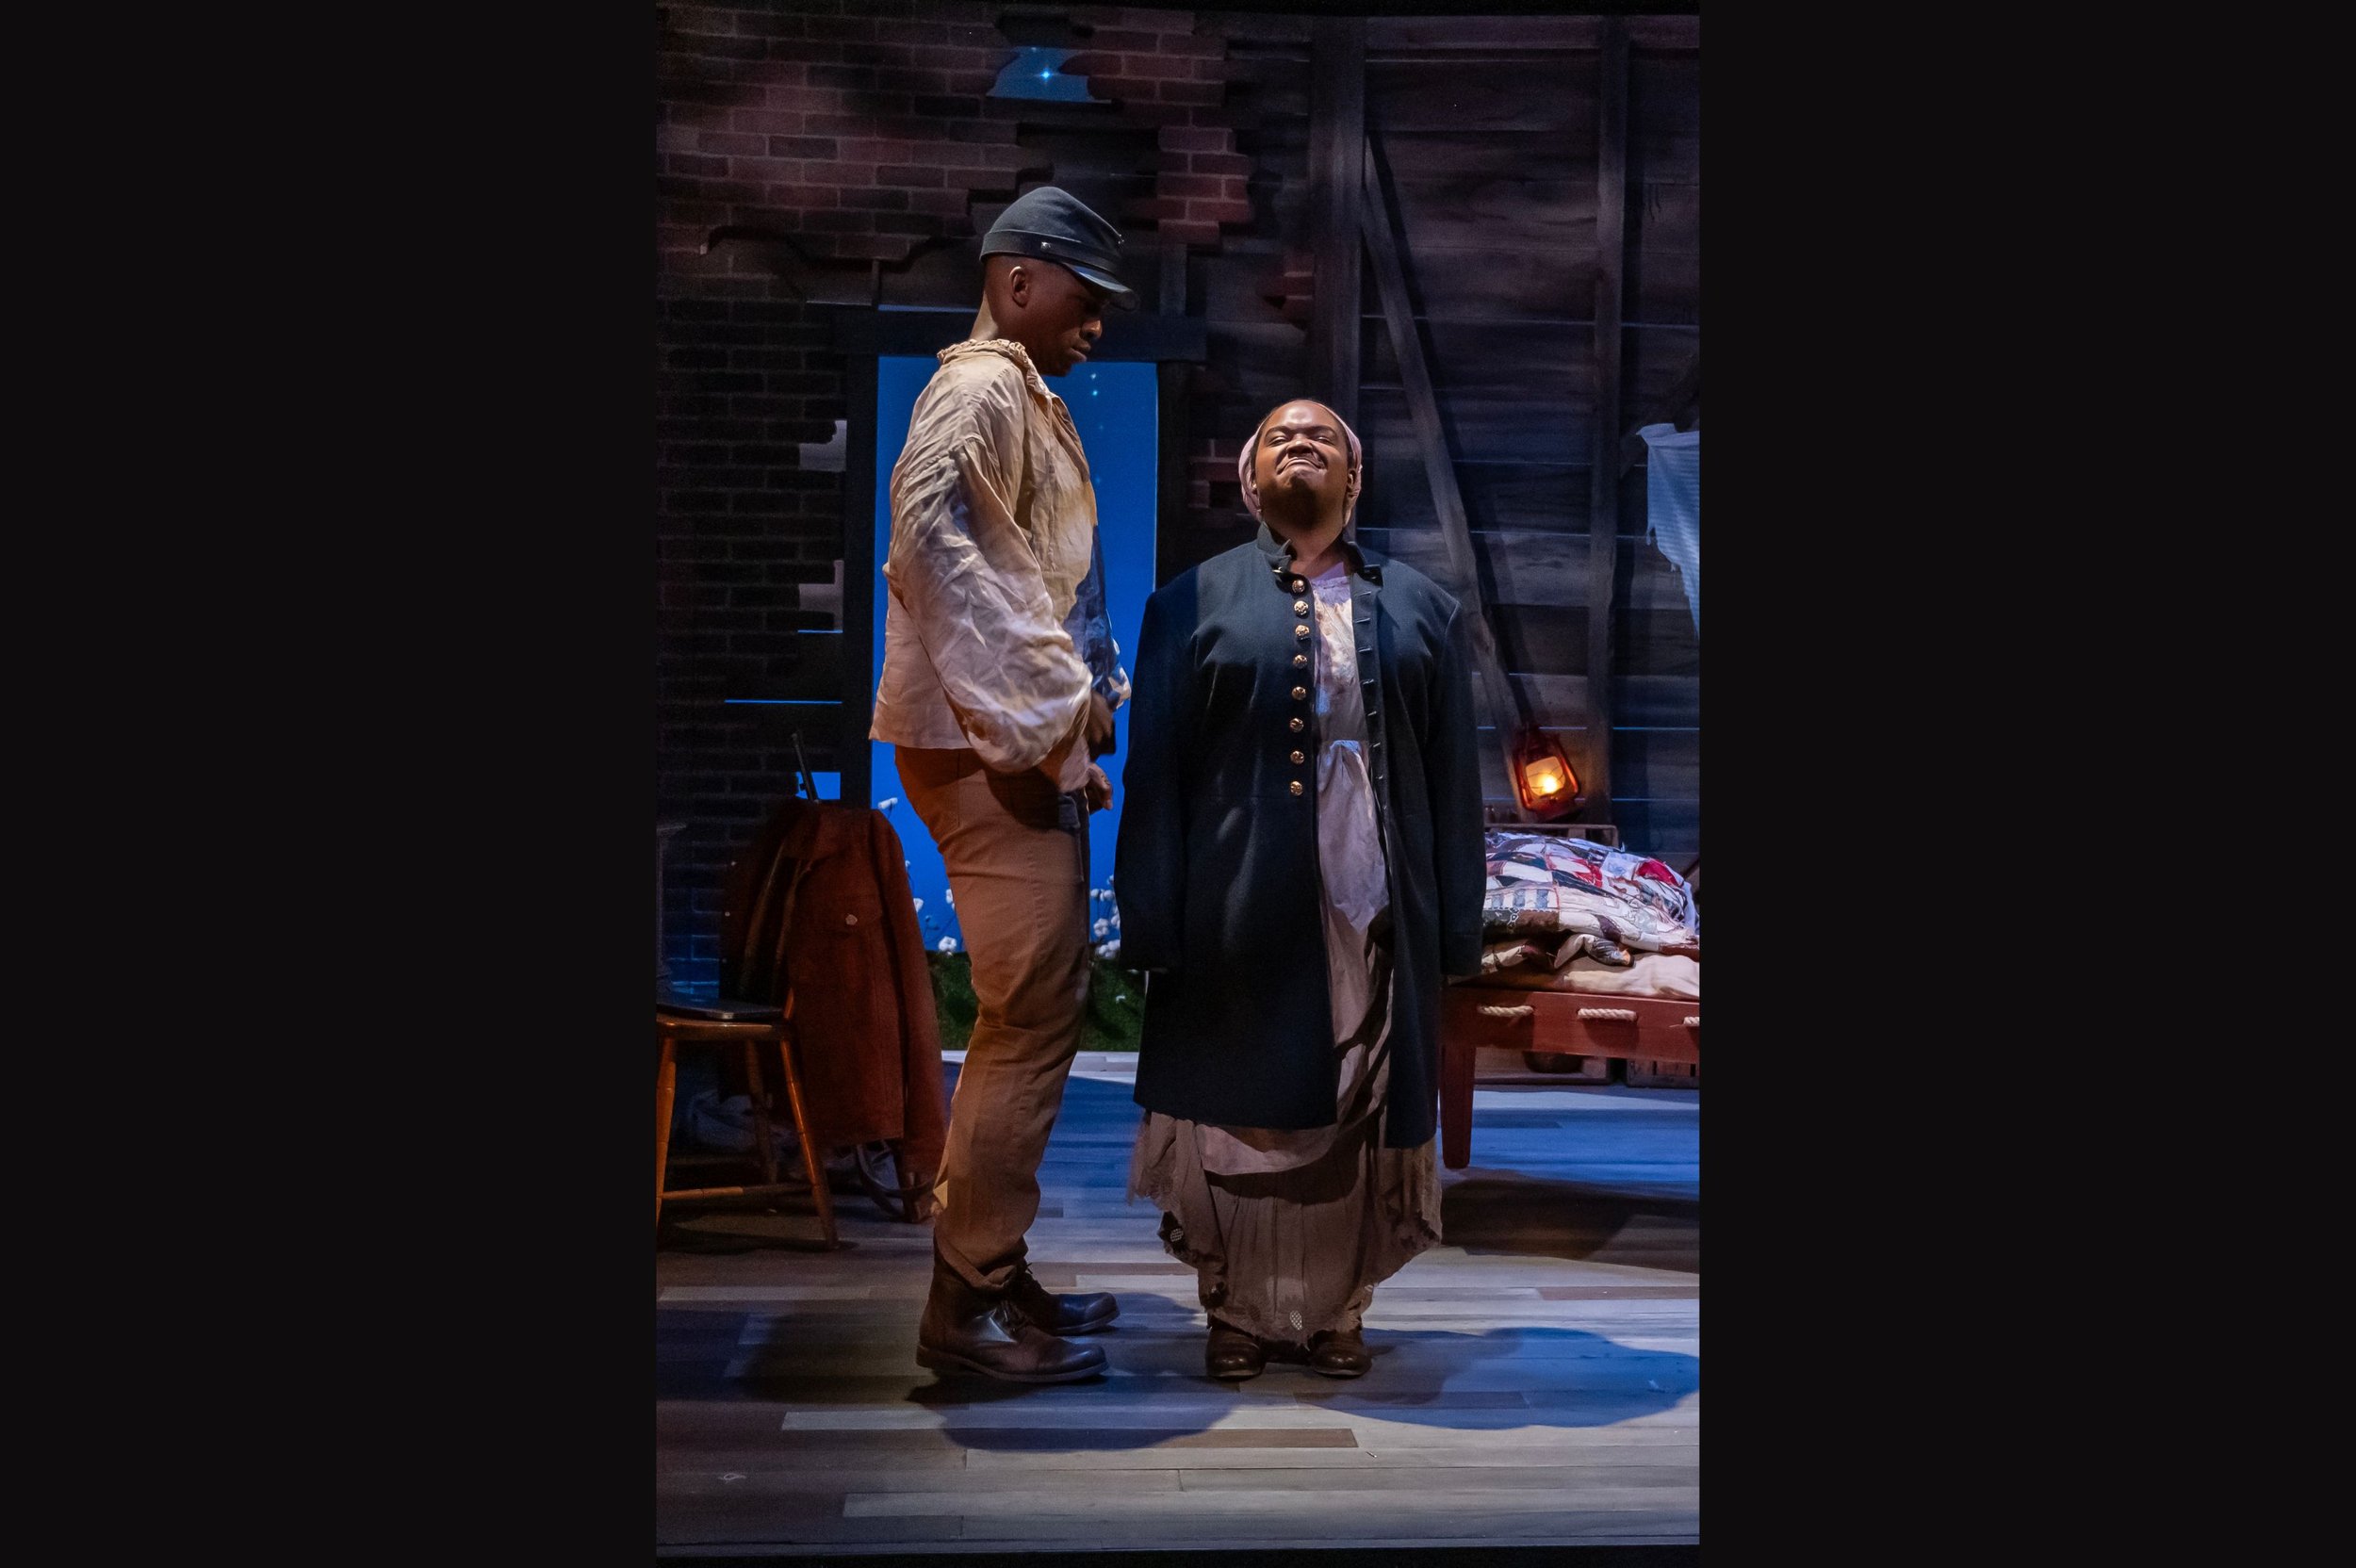   Joel Ashur as Abner and Deidre Staples as Sara in Mosaic Theater’s production of  Confederates  by Dominique Morisseau. Photo by Chris Banks.  